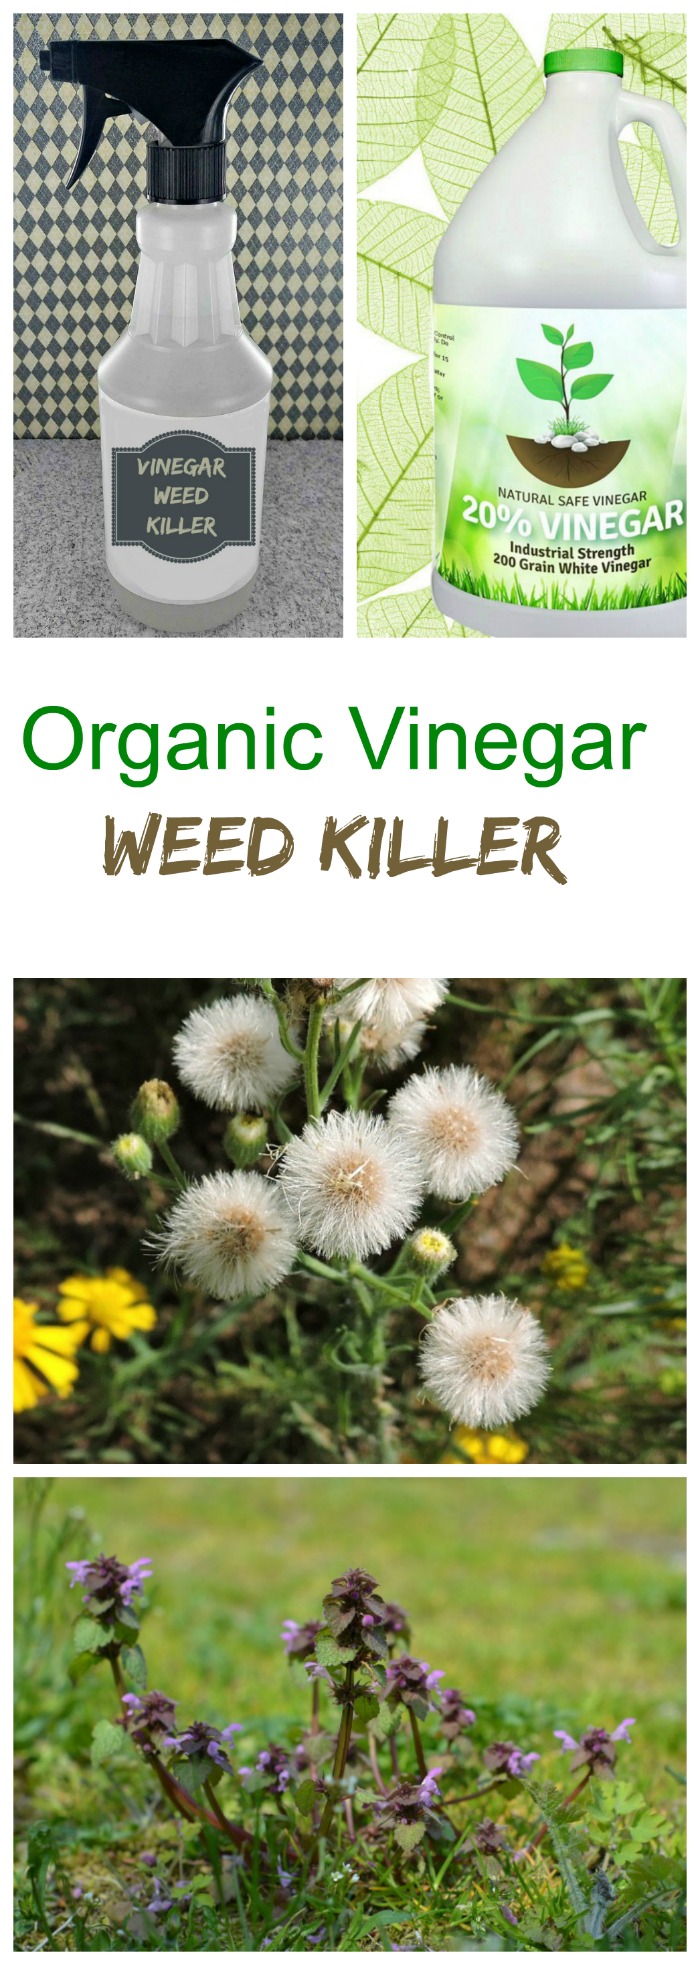 This vinegar weed killer uses organic or horticultural vinegar to kill weeds without the use of salt, which can be damaging to the soil.